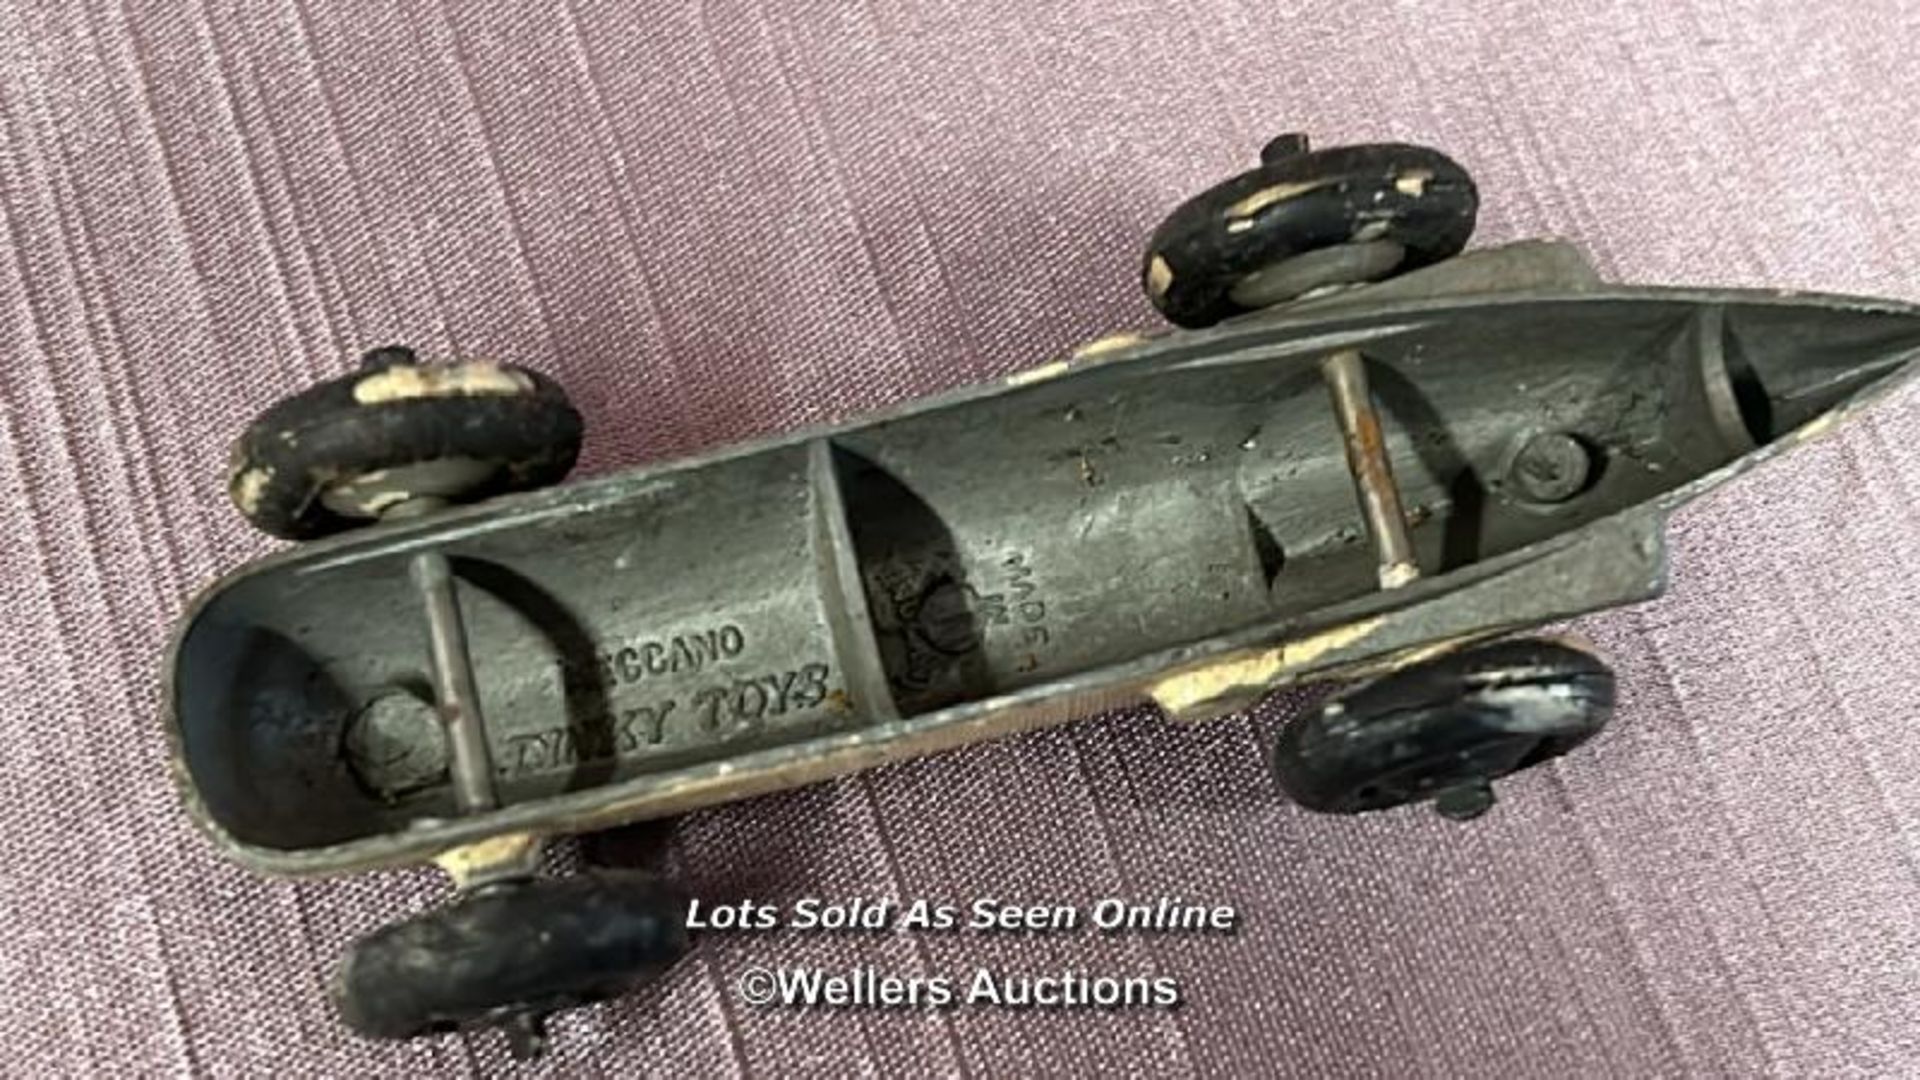 THREE DINKY DIE CAST RACING CARS INCLUDING CONNAUGHT NO. 236, BRISTOL 450 NO. 163 AND ONE OTHER - Image 6 of 7